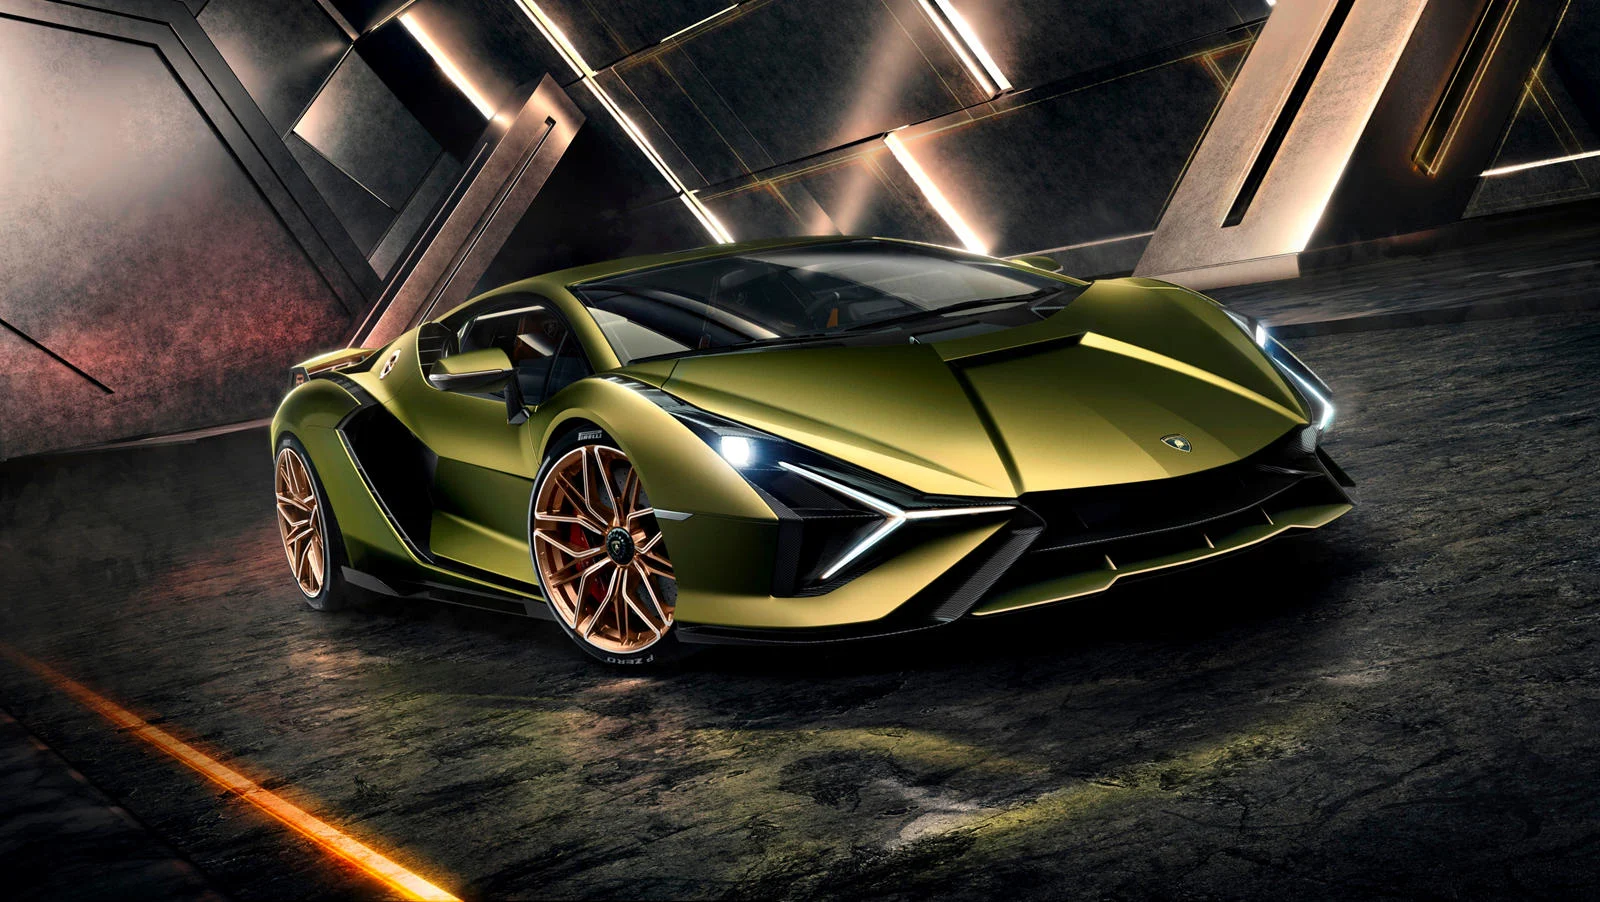 Lamborghini plans to launch its first fully electric car before 2030 |  Engadget